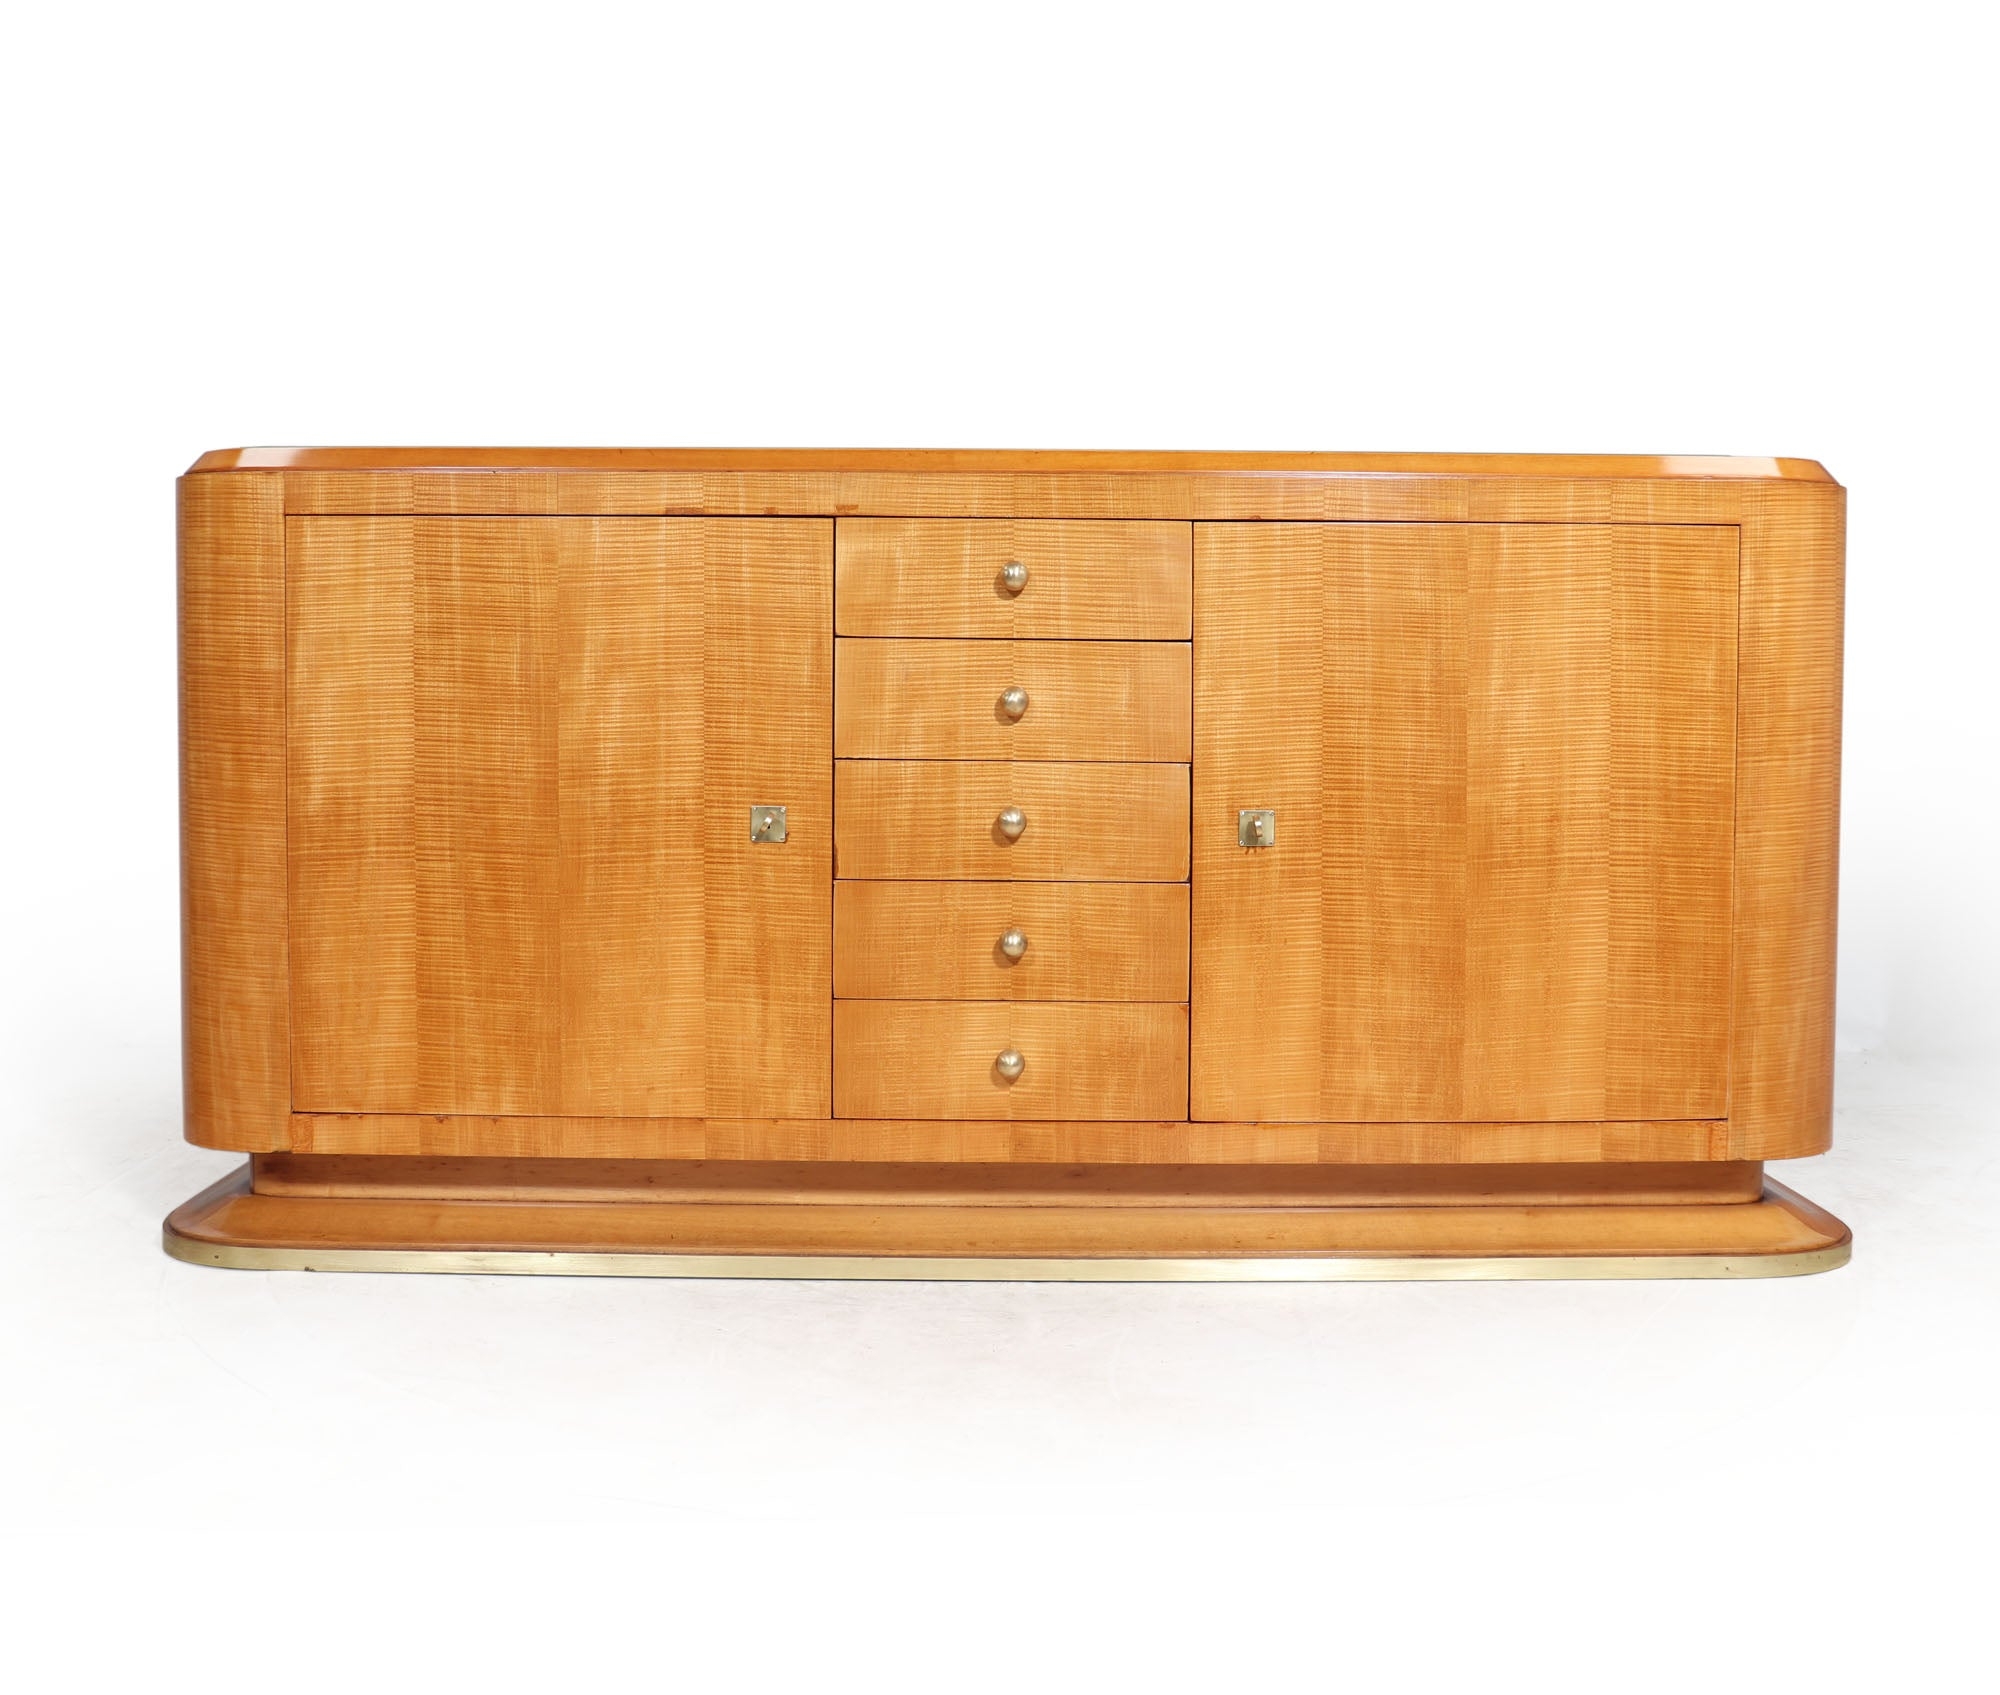 French Art Deco Sideboard in Sycamore – The Furniture Rooms